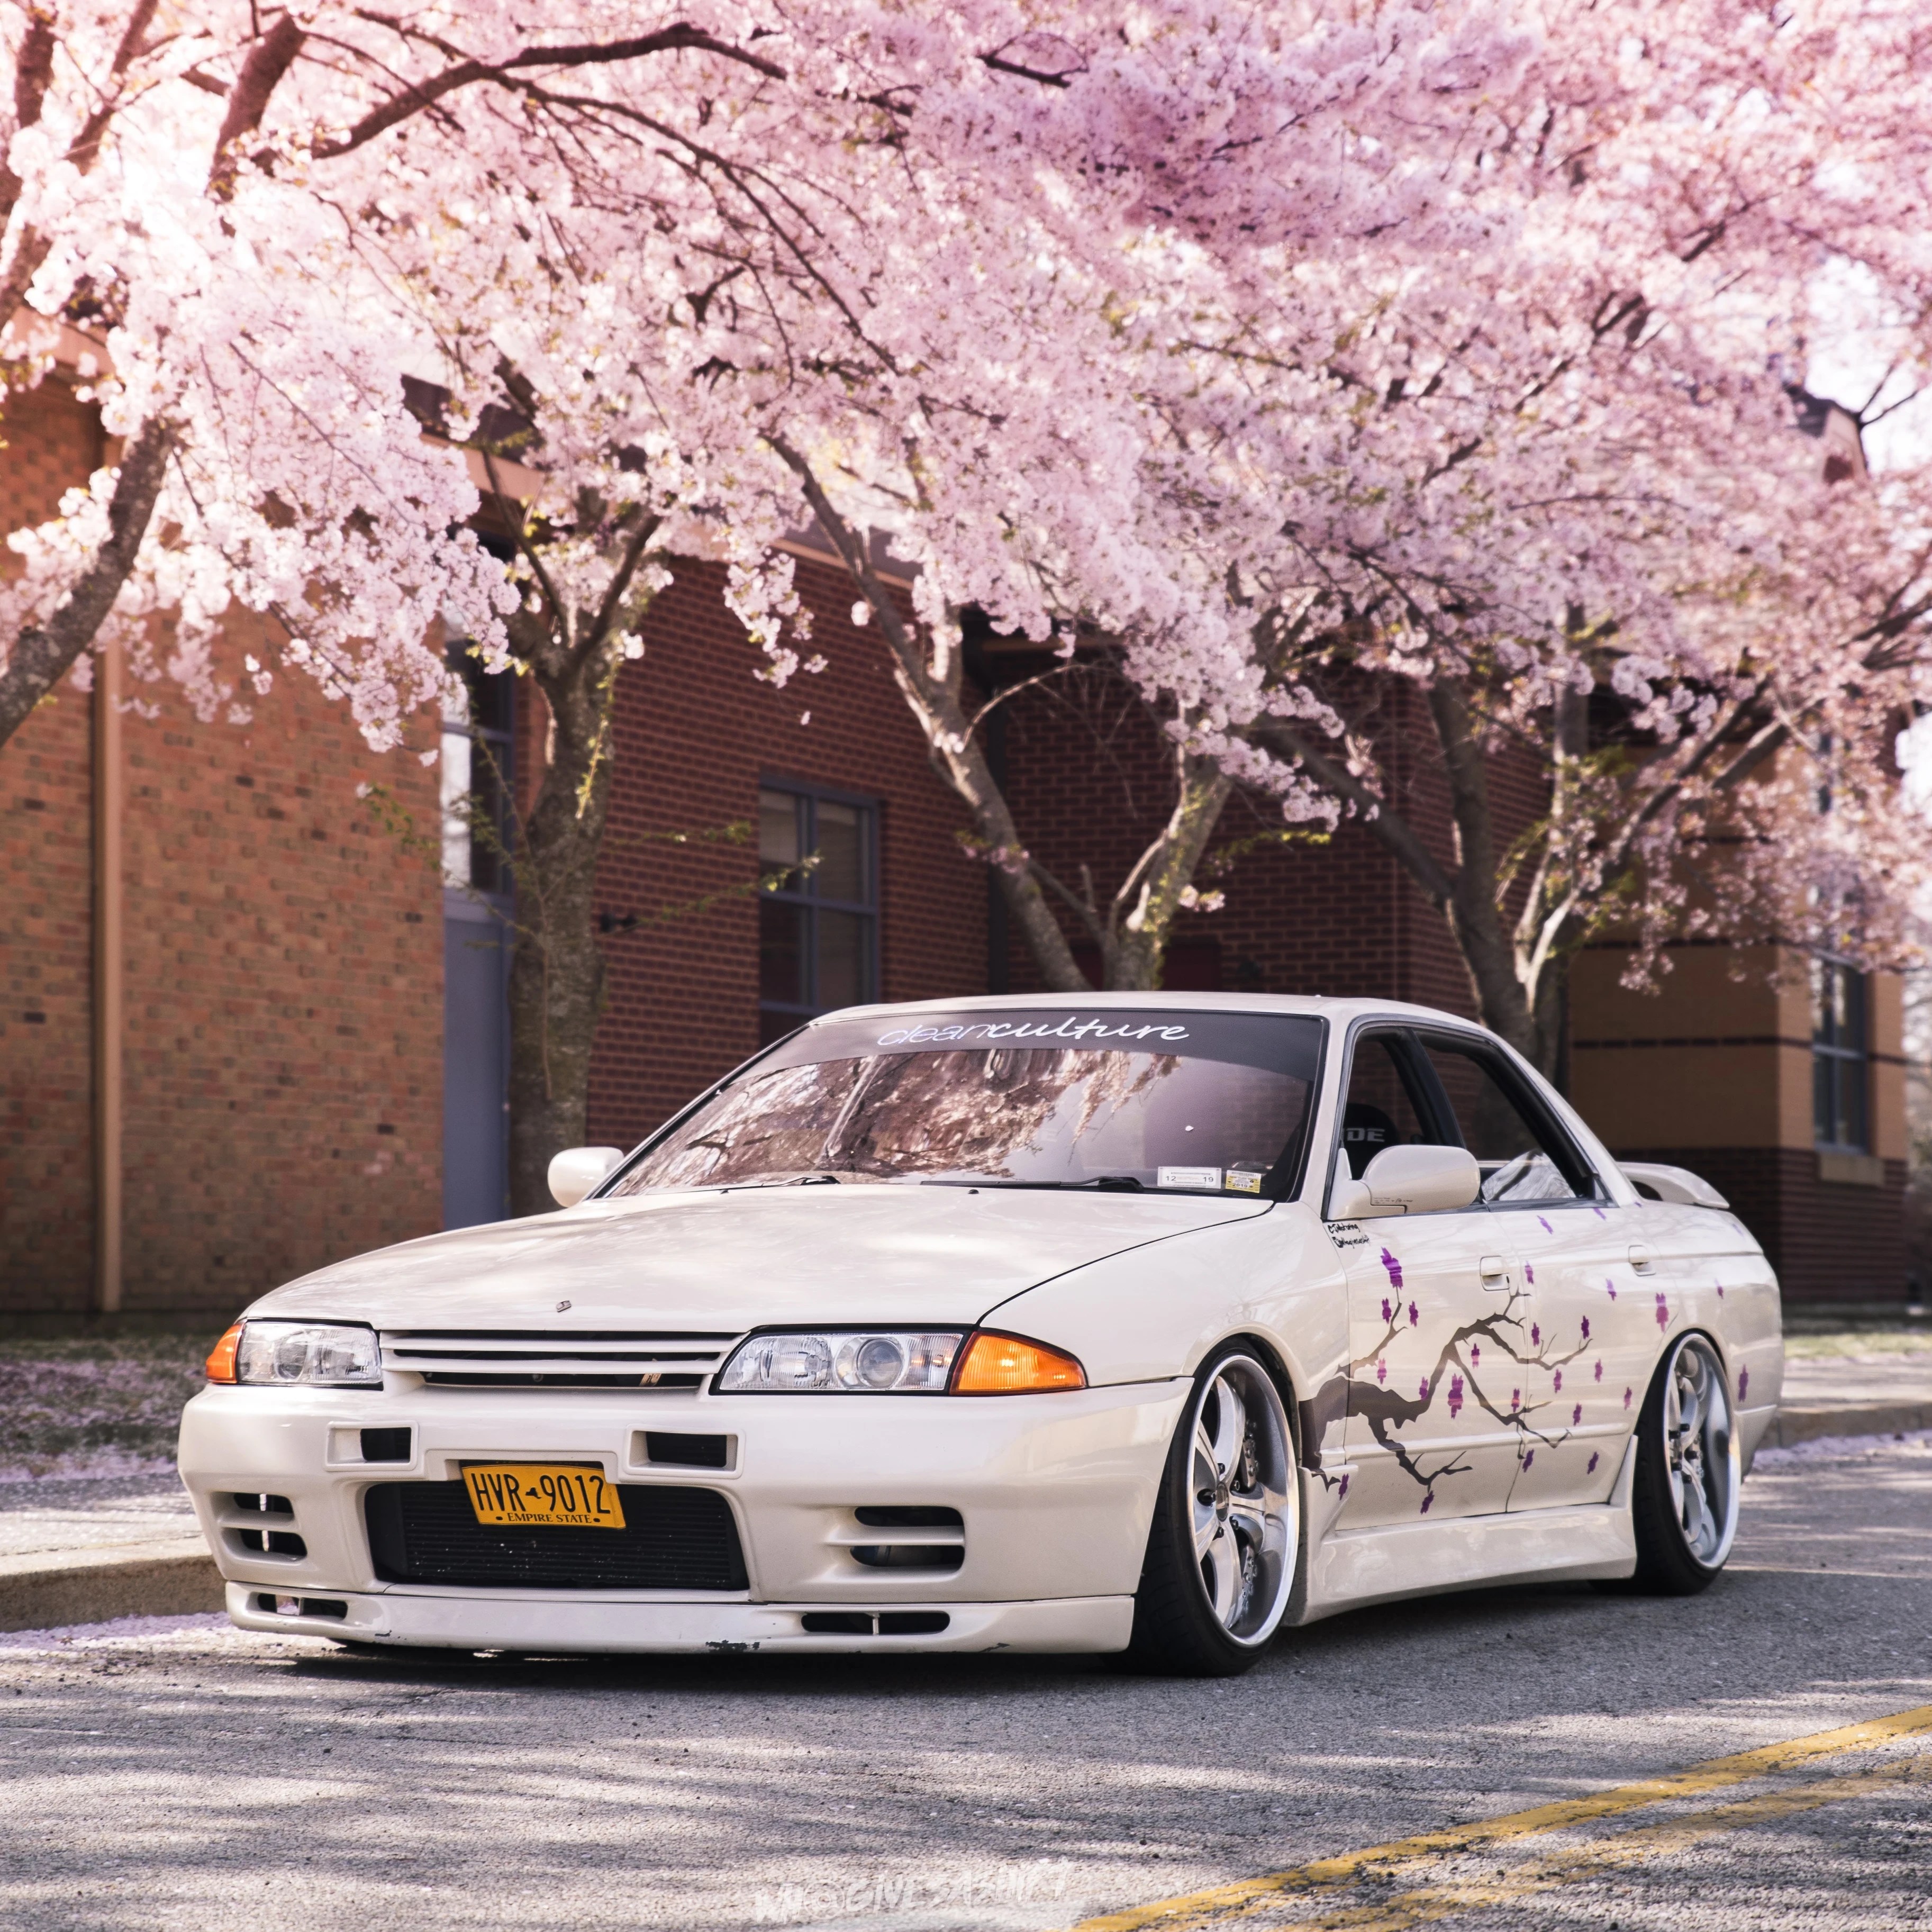 Jdm Cherry Blossom Car Wallpaper Workshop Jdm Classic Car Skyline Sakura / The cherry blossoms are blooming and that reminded me that i need to do an updated sakura shot